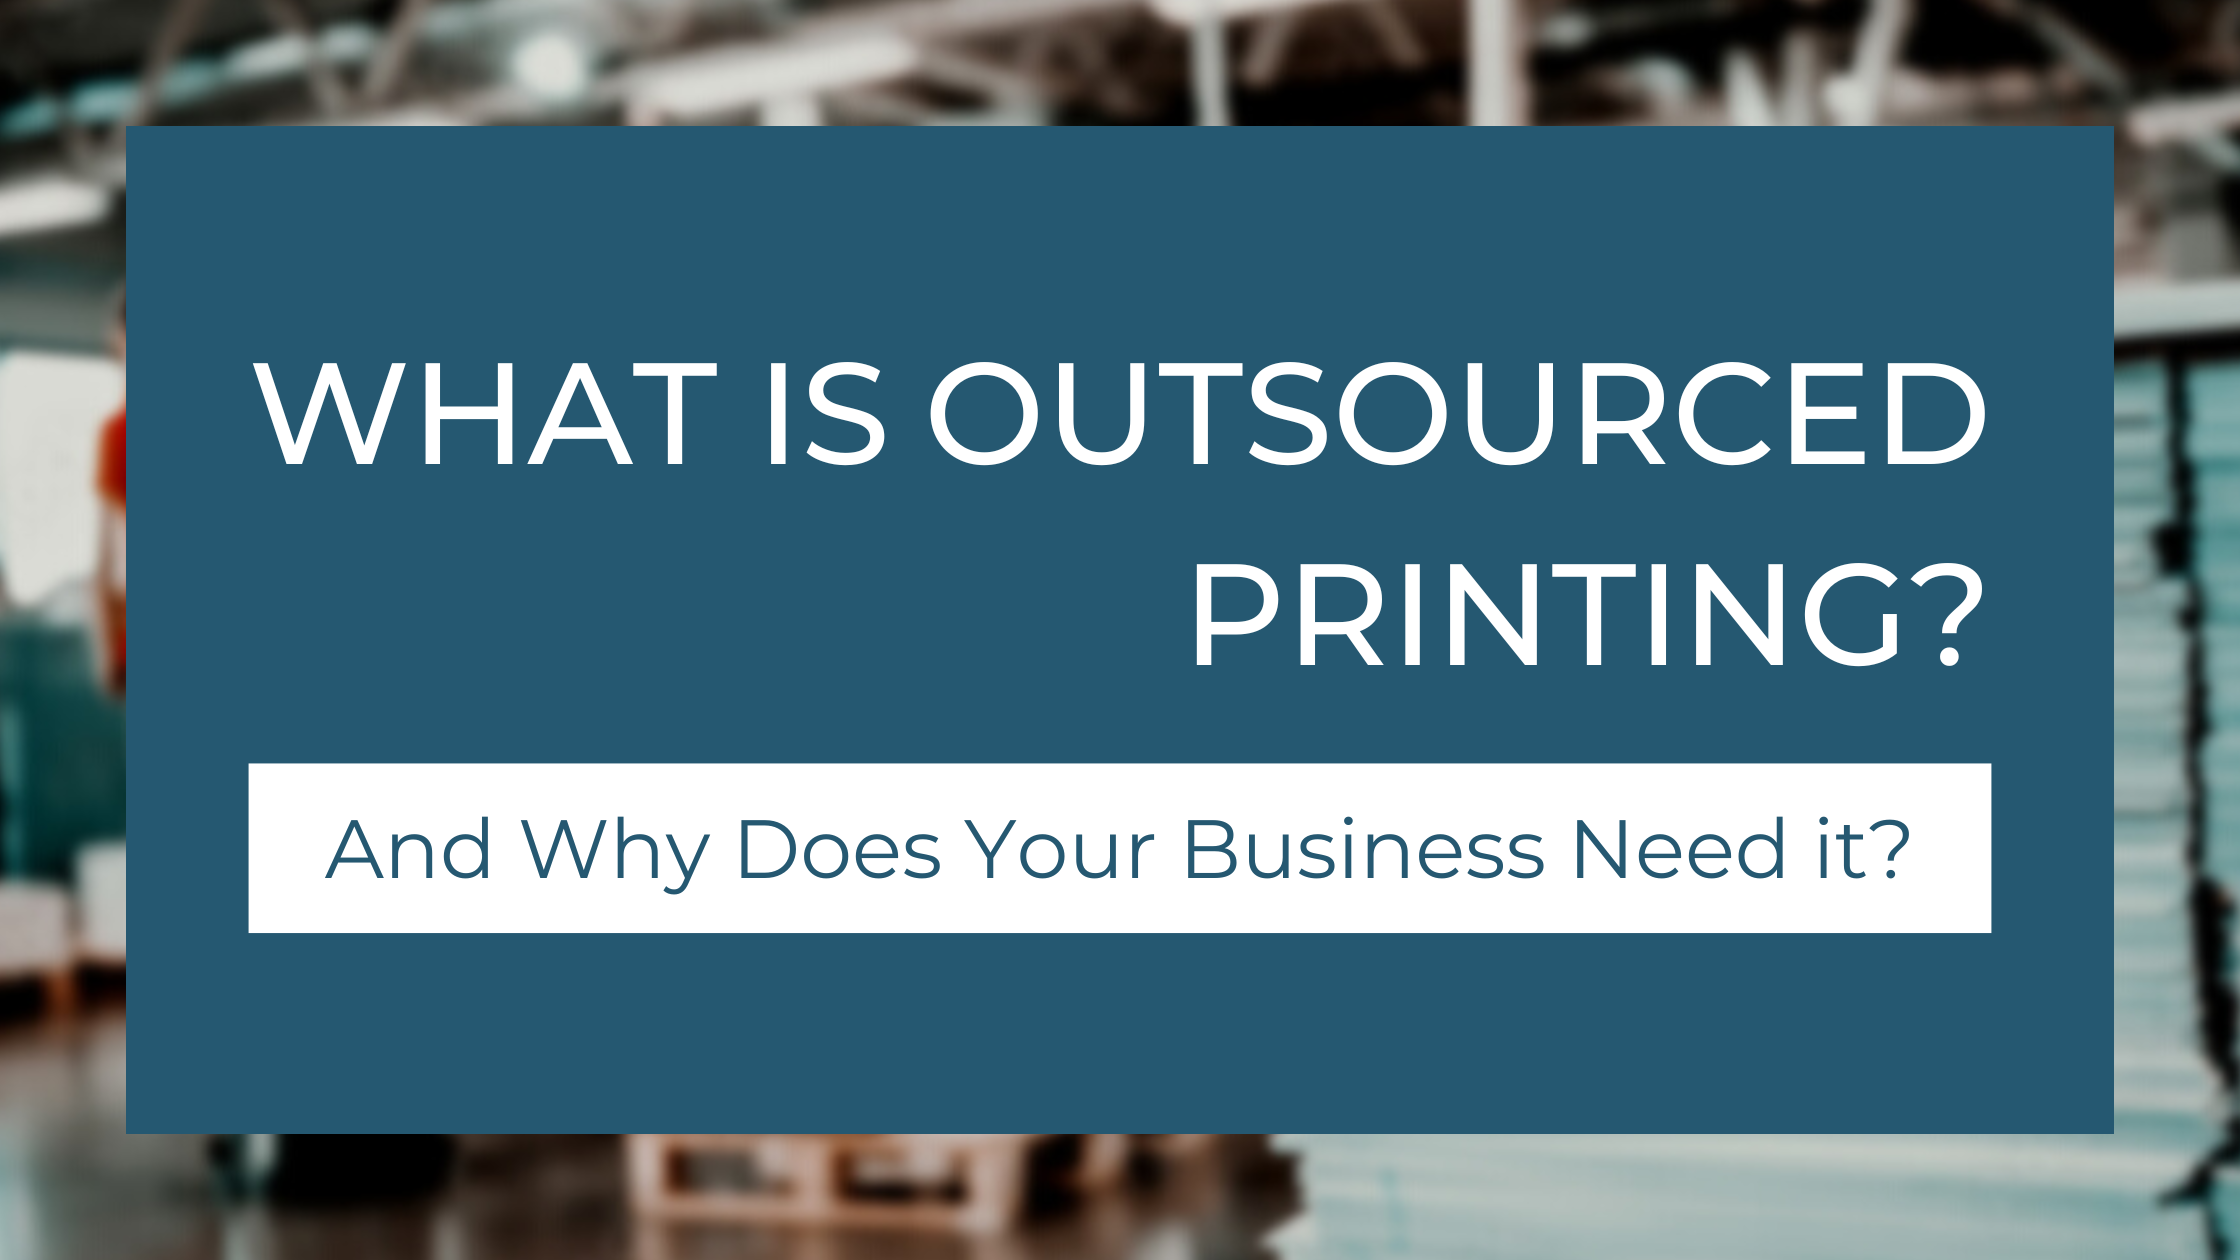 What Is Outsourced Printing? And Why Does Your Business Need it?